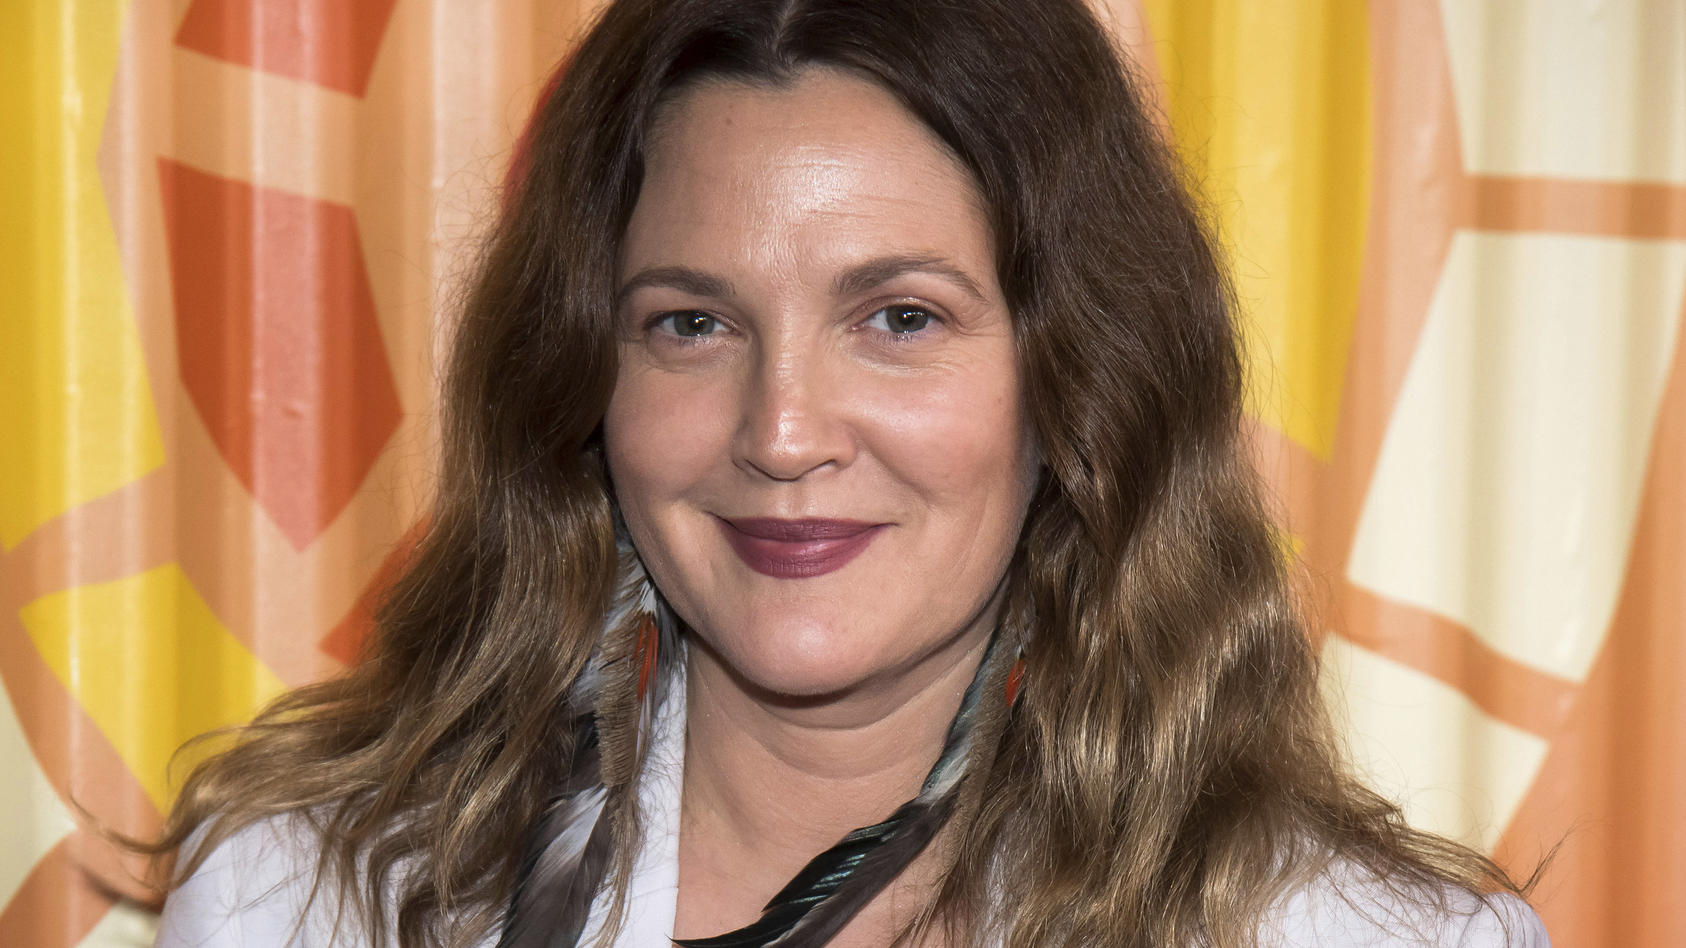 FILE - Drew Barrymore attends The Charlize Theron Africa Outreach Project fundraiser on Nov. 12, 2019, in New York. Barrymore's first show on Monday, Sept. 13, 2020, distributed by the CBS television studio, features former "Charlie's Angels" co-star